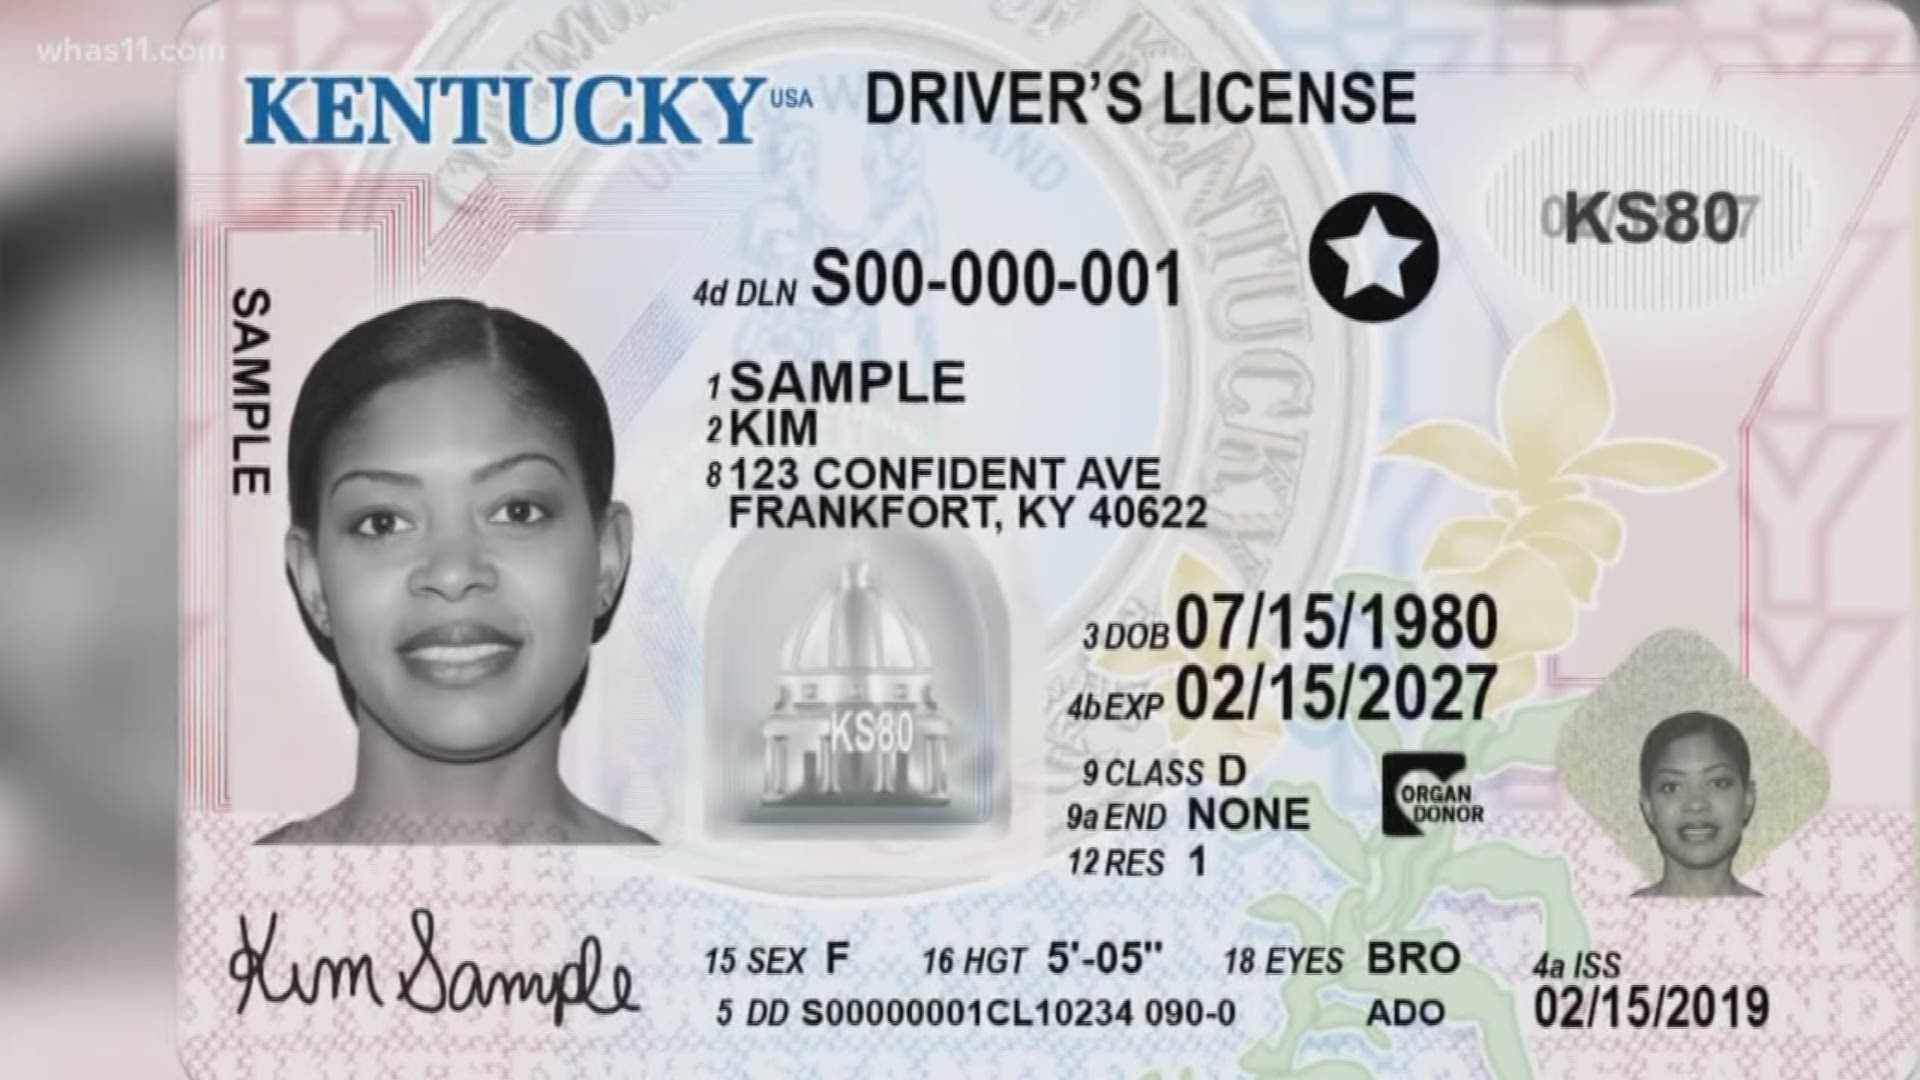 There are 15 Driver Licensing Regional Office in Kentucky that are accepting appointments and some walk-ins.